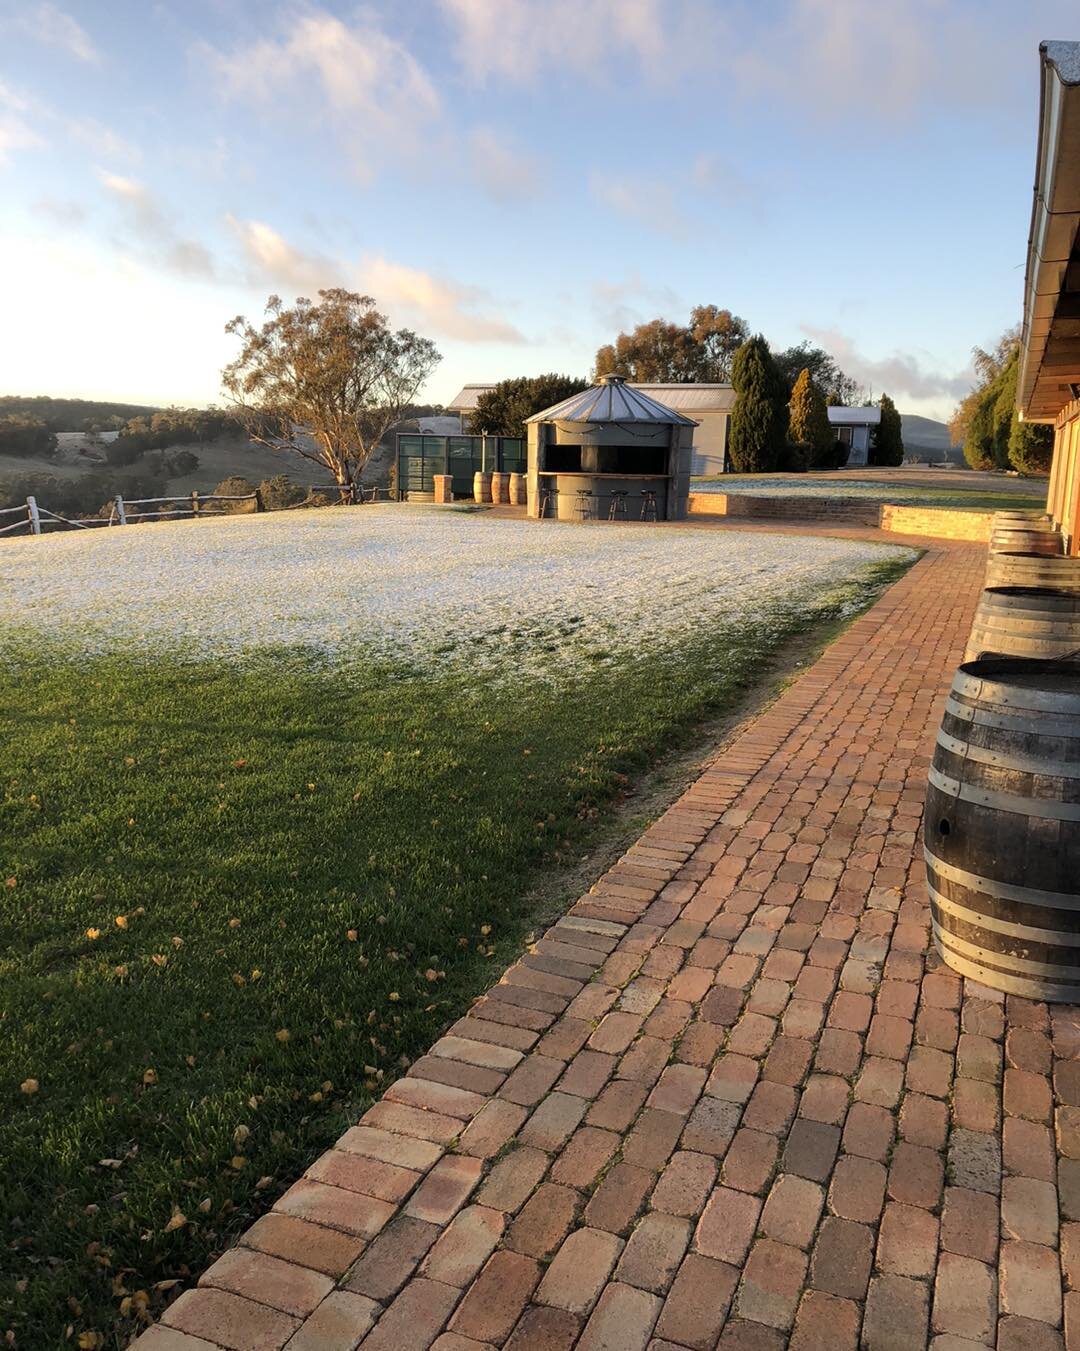 A lovely dusting of snow overnight ❄️ 
.
.
.
.
#snow #oberon #oberonnsw #experienceoberon #visitoberon #countryviews #snowinthecountry